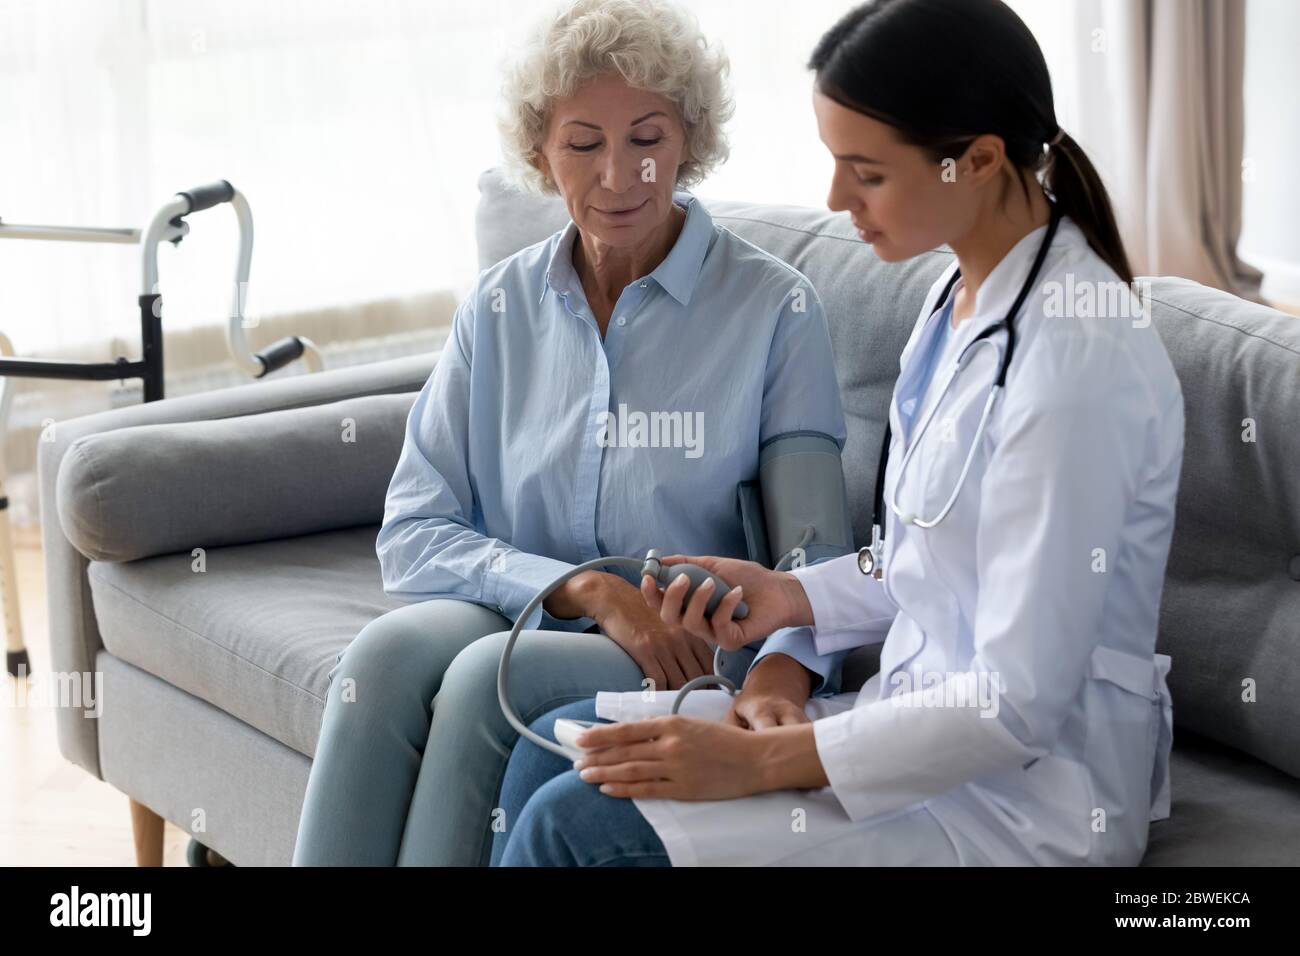 Physician manually takes blood pressure to elderly woman patient Stock Photo